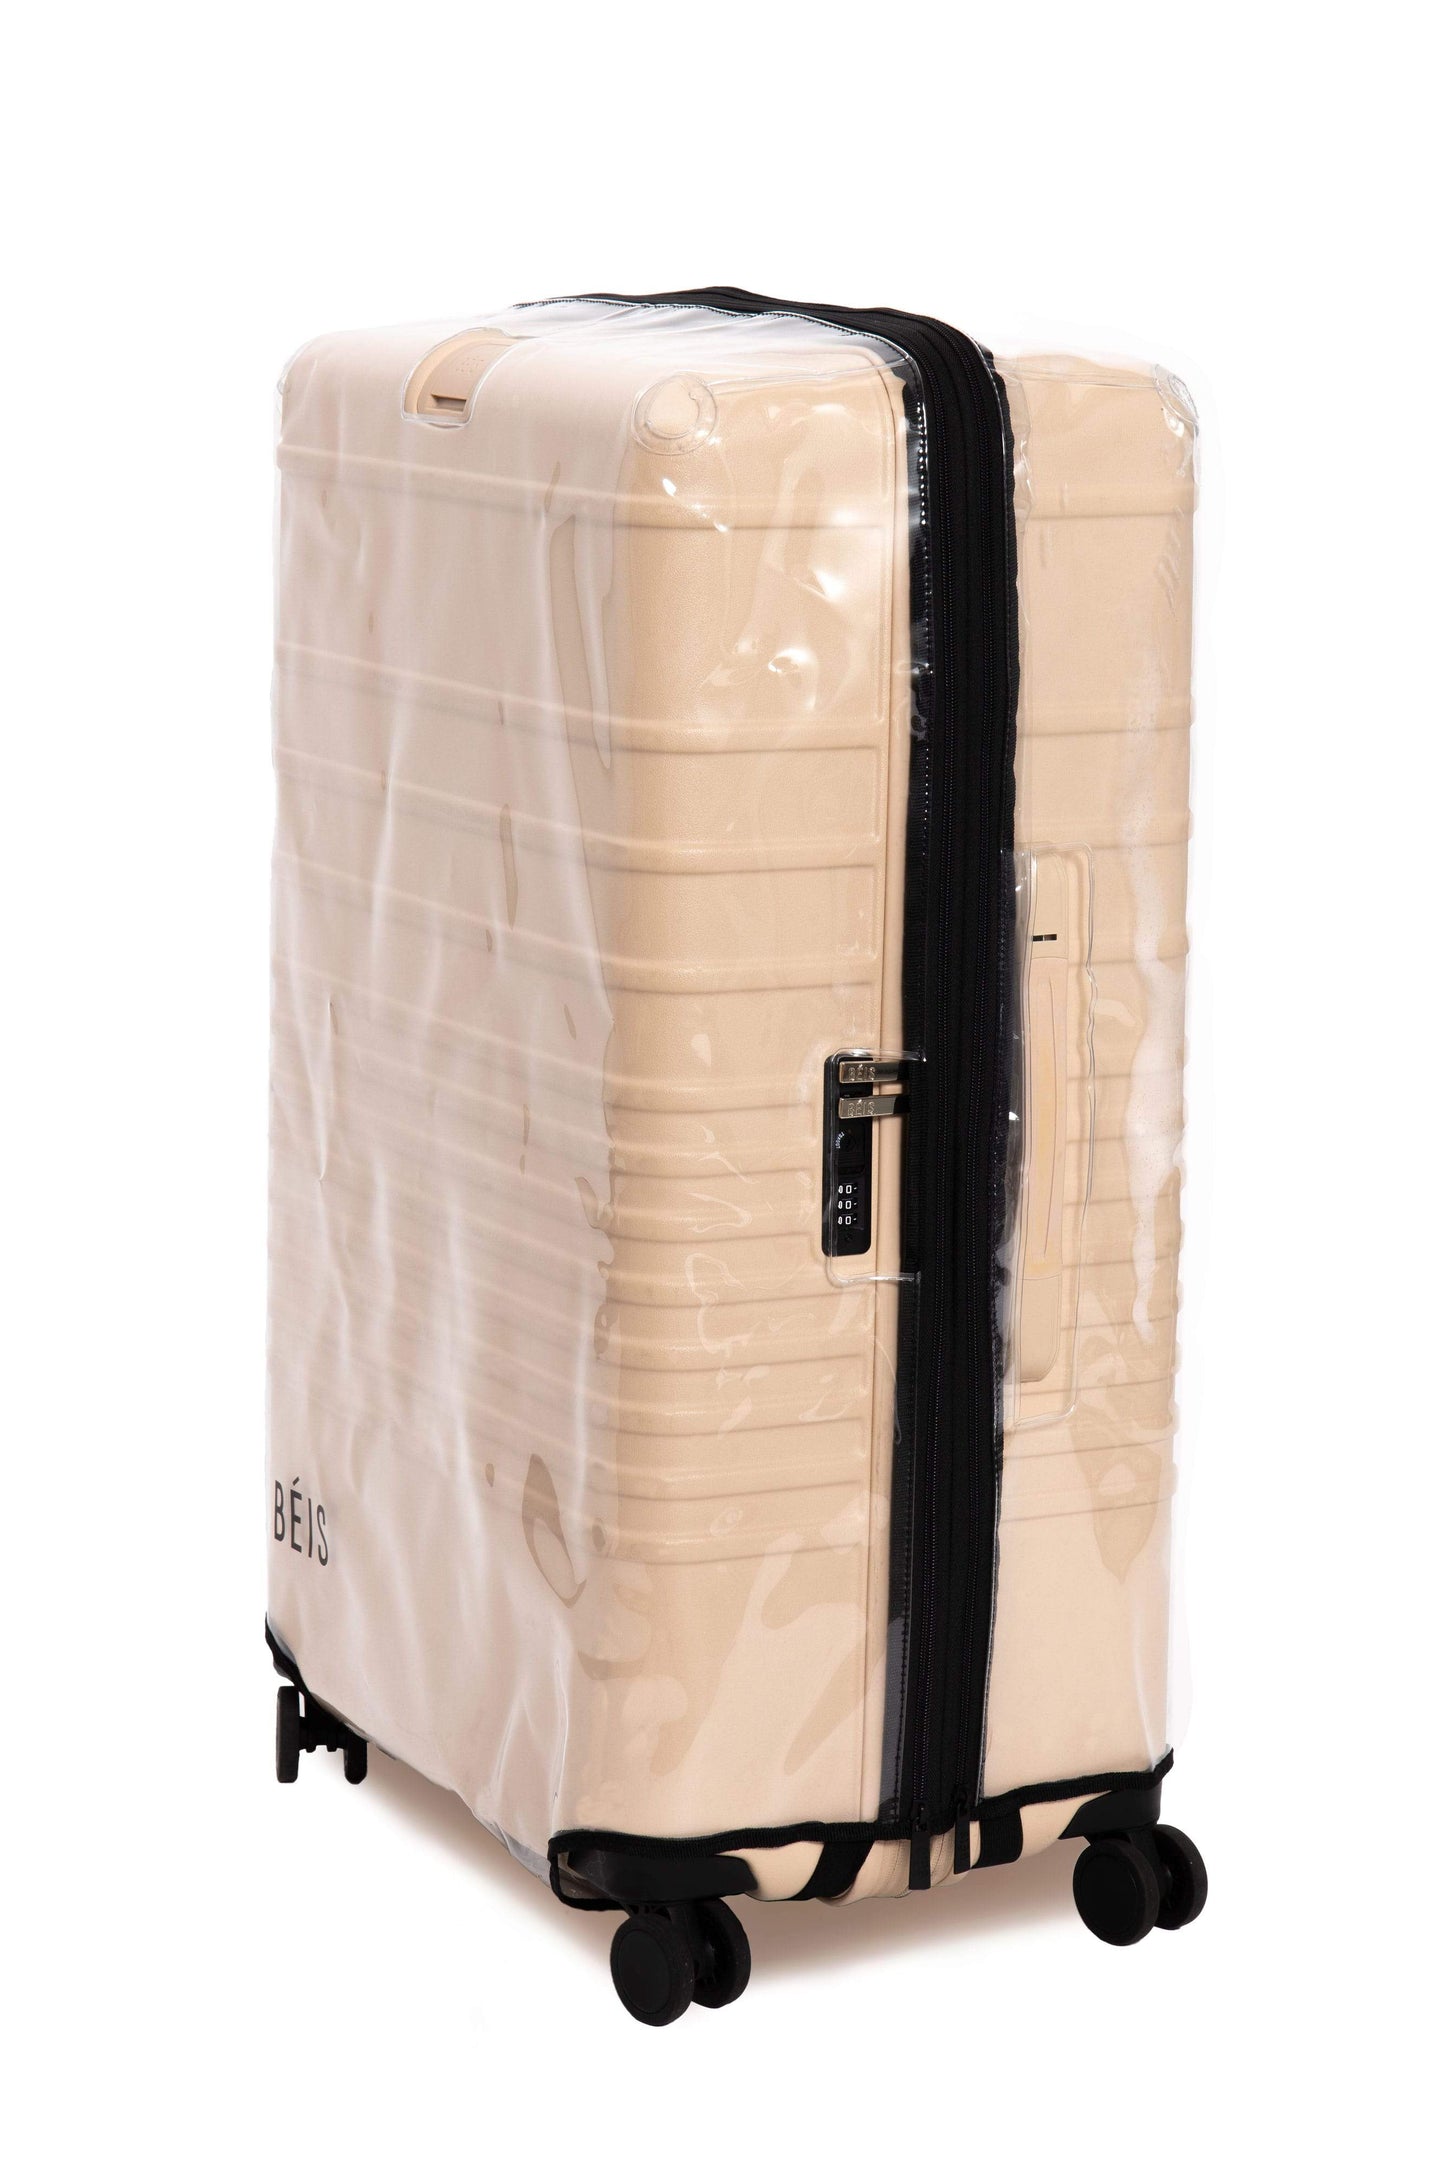 29" Large Luggage Cover Side